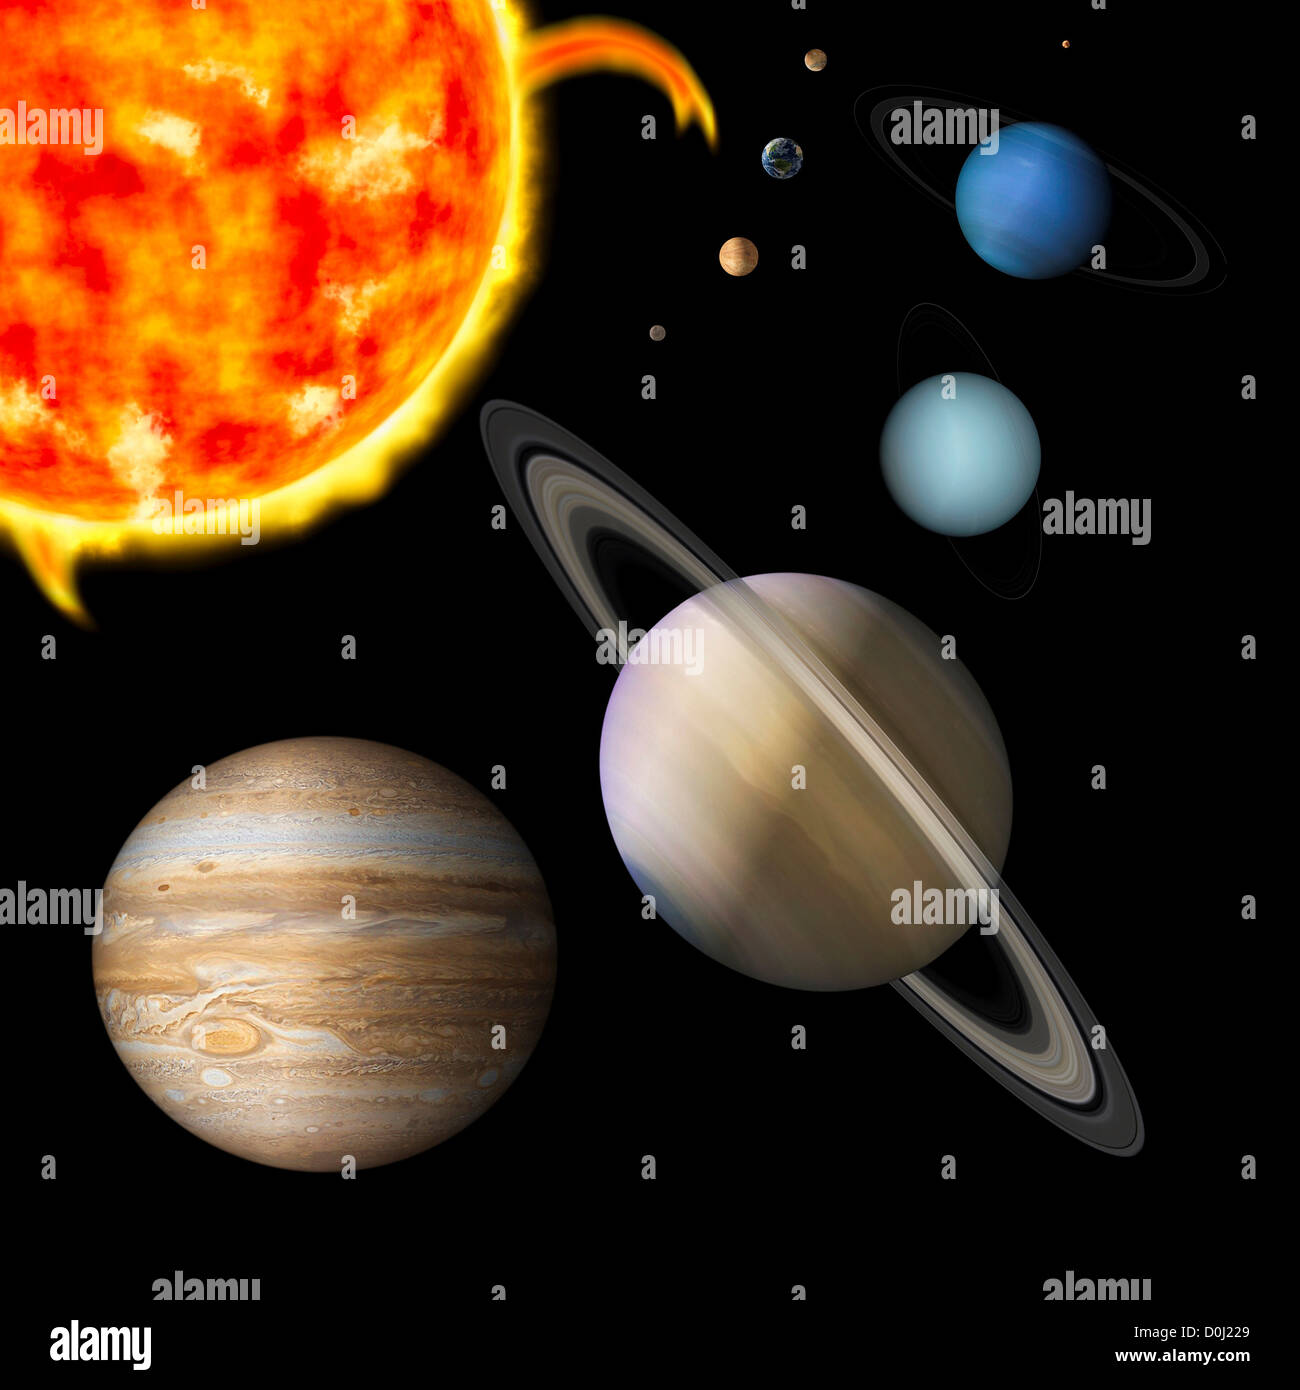 Digital Illustration of the Sun and Nine Planets of Our Solar System Stock Photo